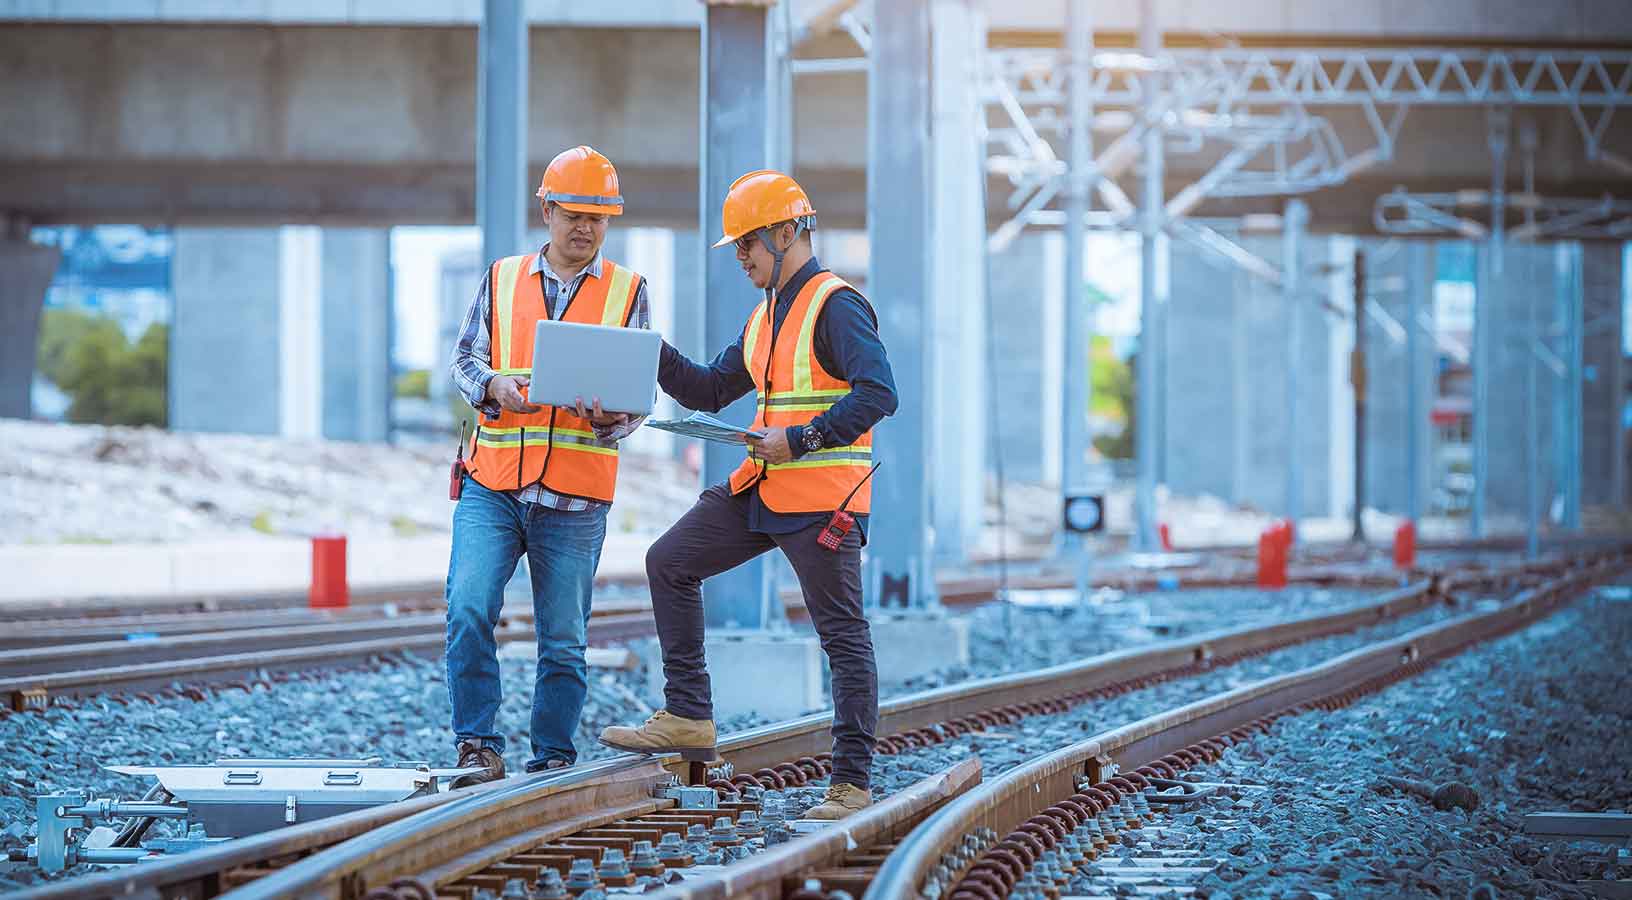 Engineer under discussion inspection and checking construction process railway switch and checking work on railroad station. Engineer wearing safety uniform and safety helmet at work.